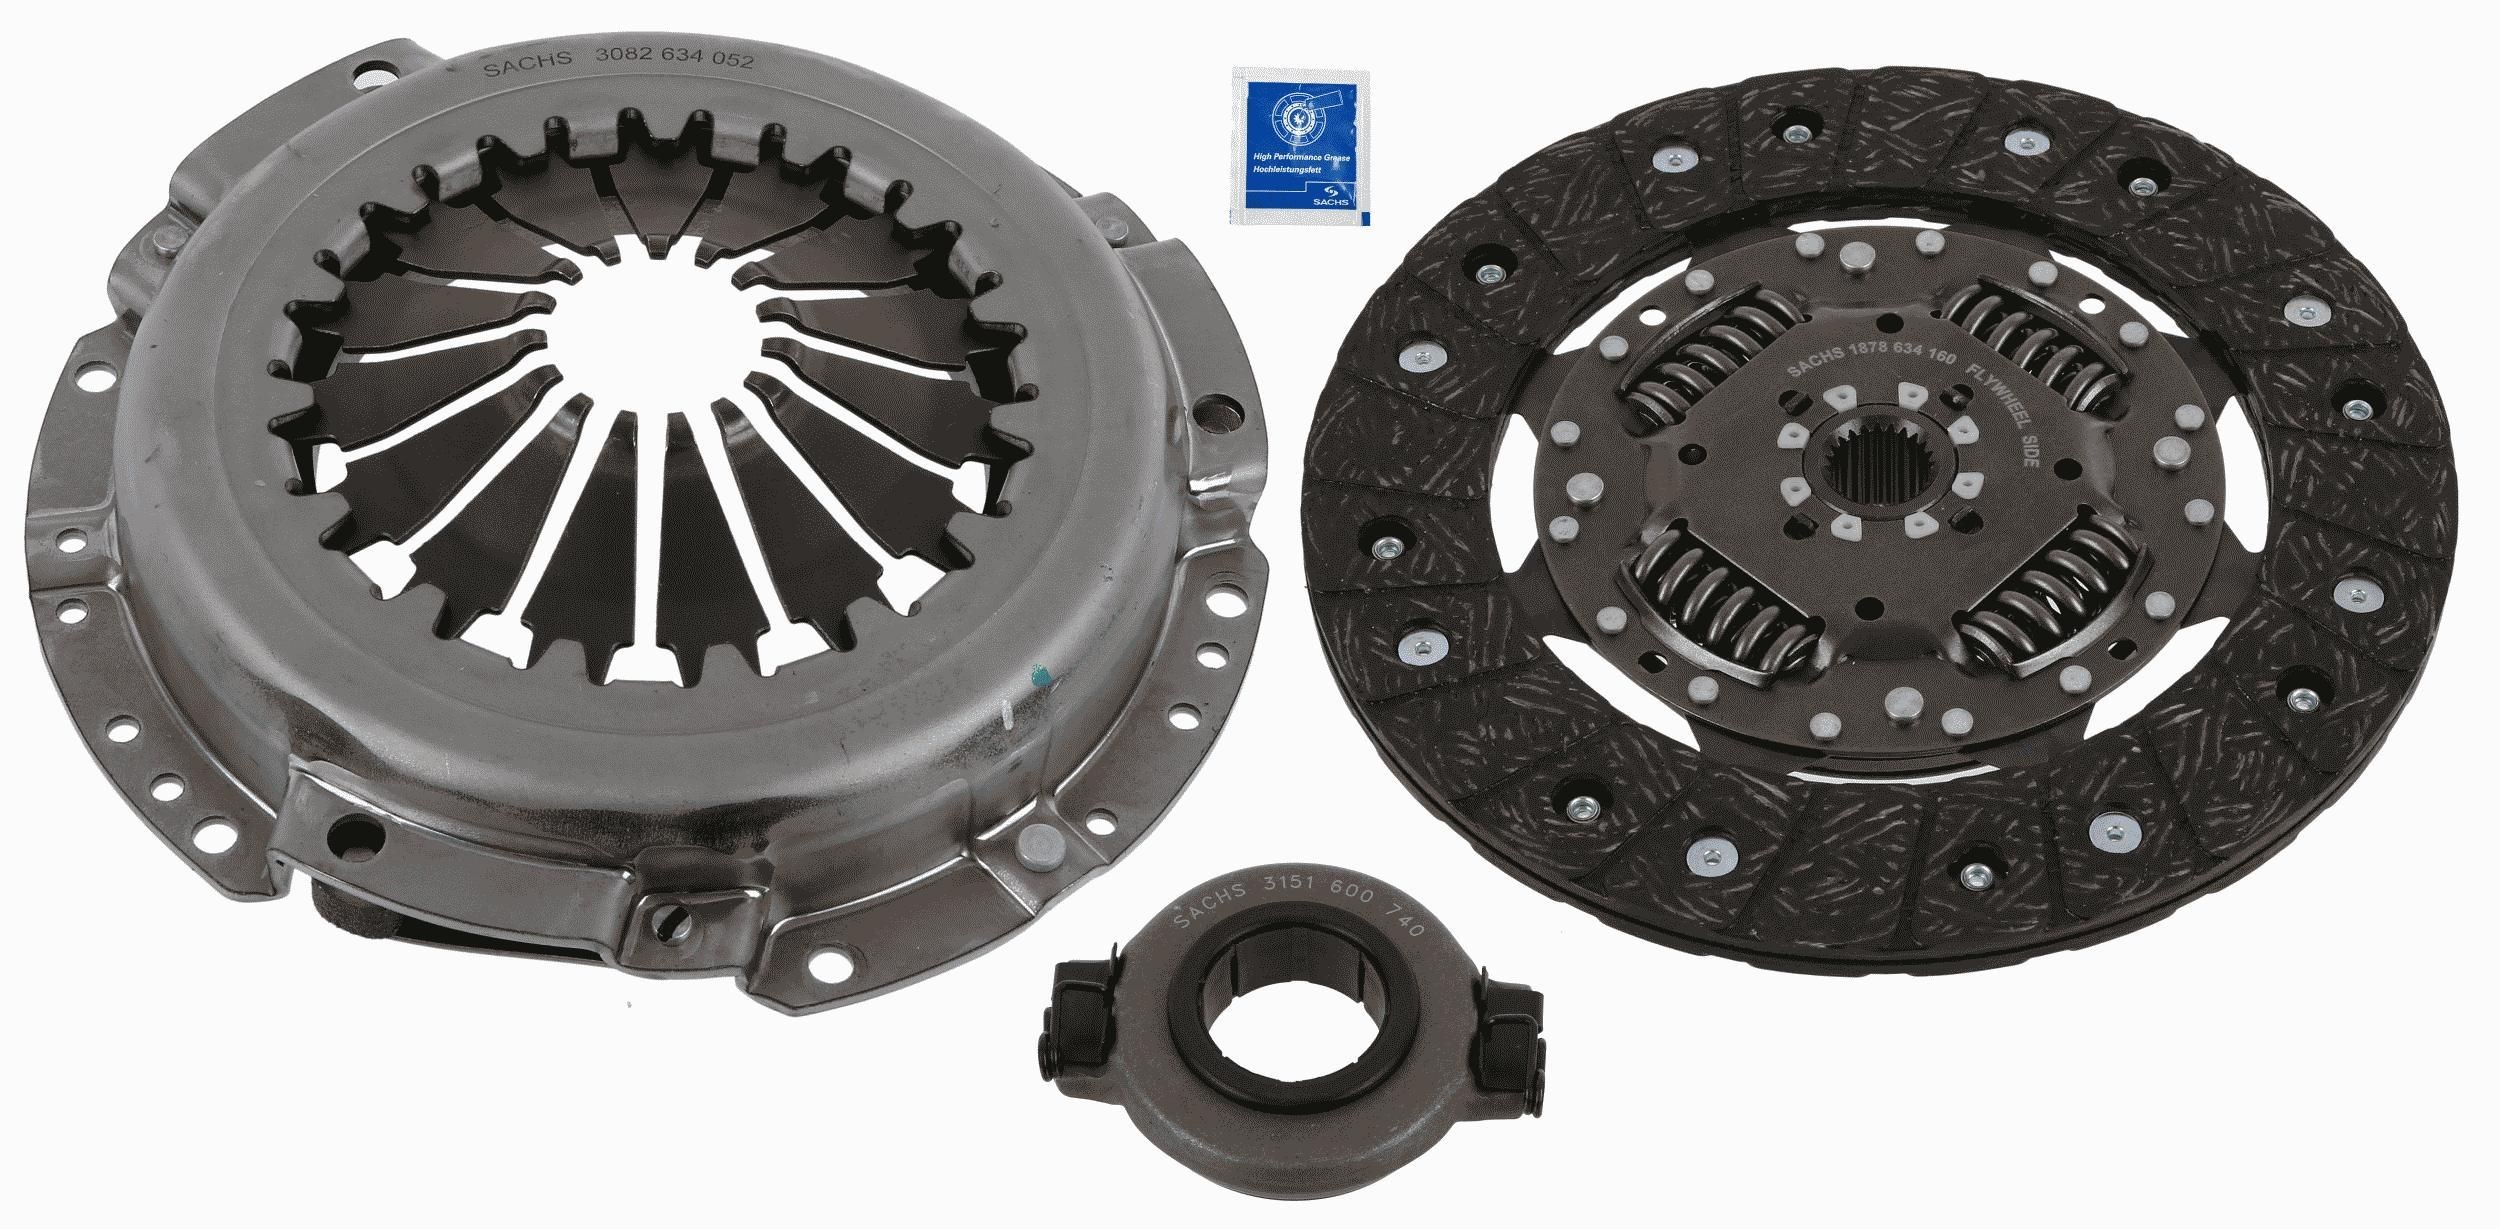 SACHS 3000 951 650 Clutch kit PORSCHE experience and price